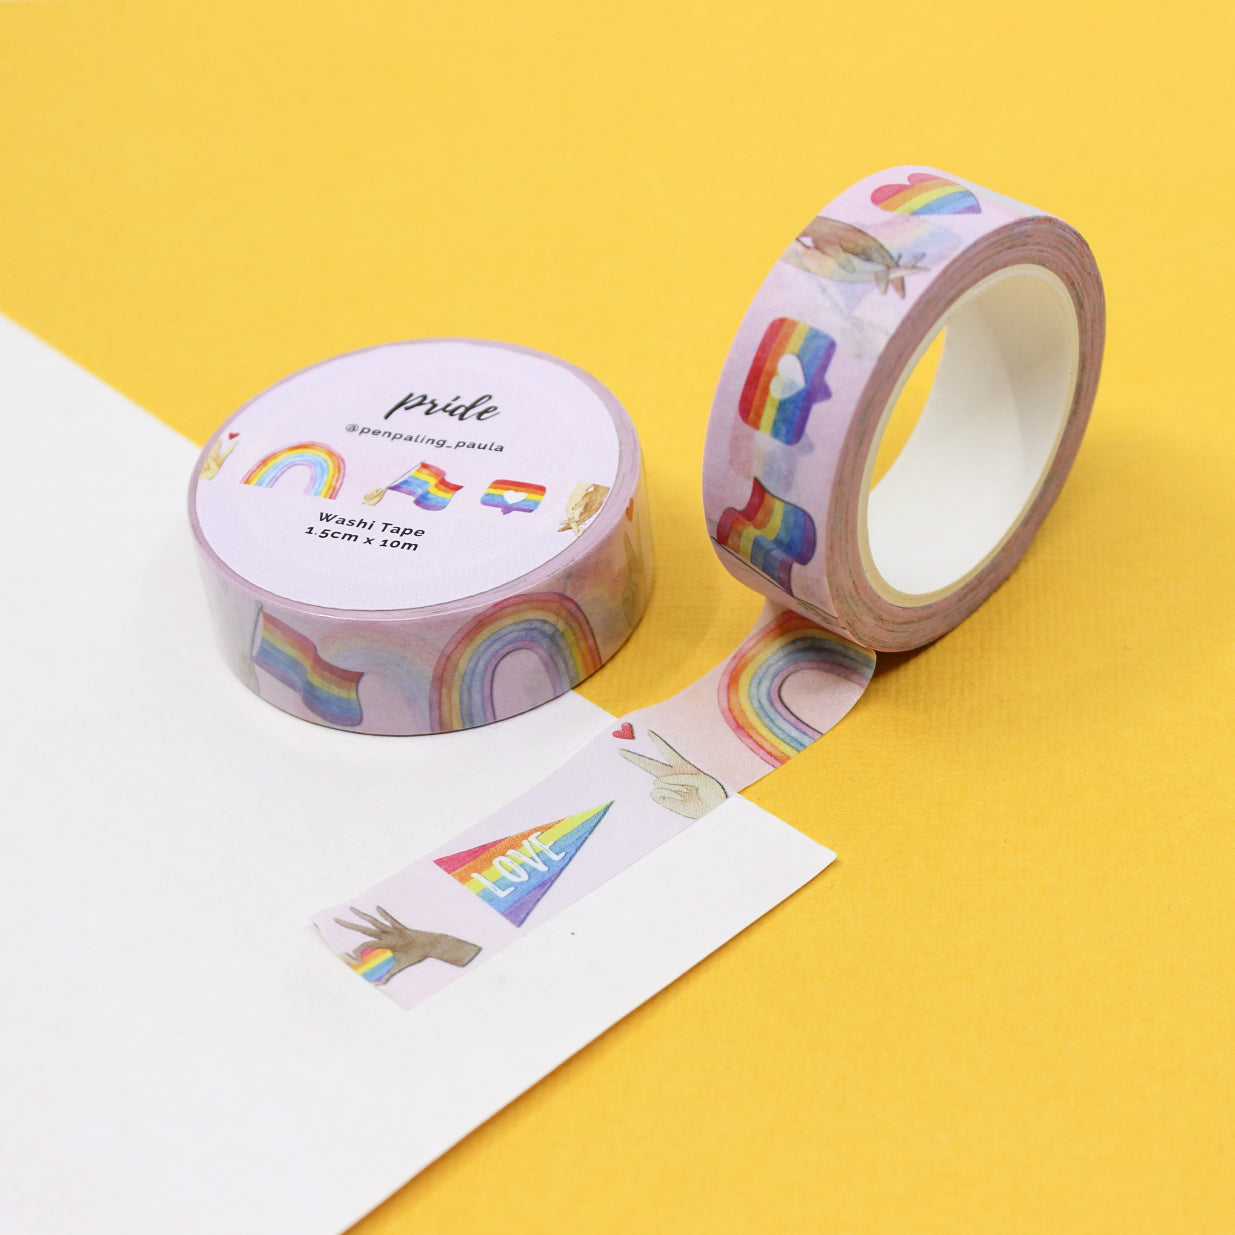 This washi tape features Pride symbols that show love is love. The rainbow pride flag, rainbow hearts and other pride symbols are perfect for your pride celebration. This tape is sold at BBB Supplies Craft Shop.